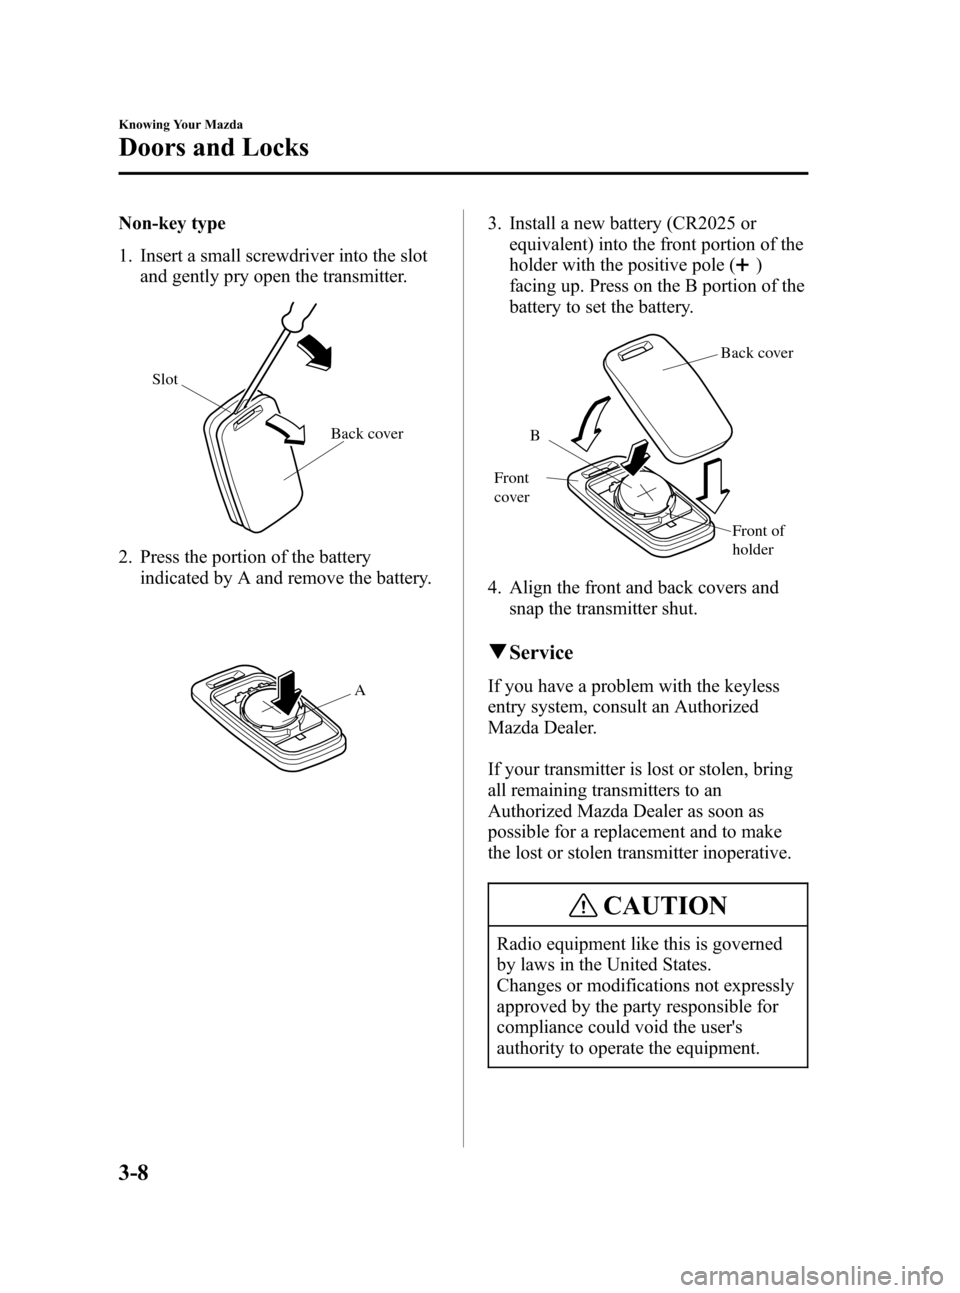 MAZDA MODEL 3 HATCHBACK 2007  Owners Manual (in English) Black plate (82,1)
Non-key type
1. Insert a small screwdriver into the slot
and gently pry open the transmitter.
Back cover Slot
2. Press the portion of the battery
indicated by A and remove the batte